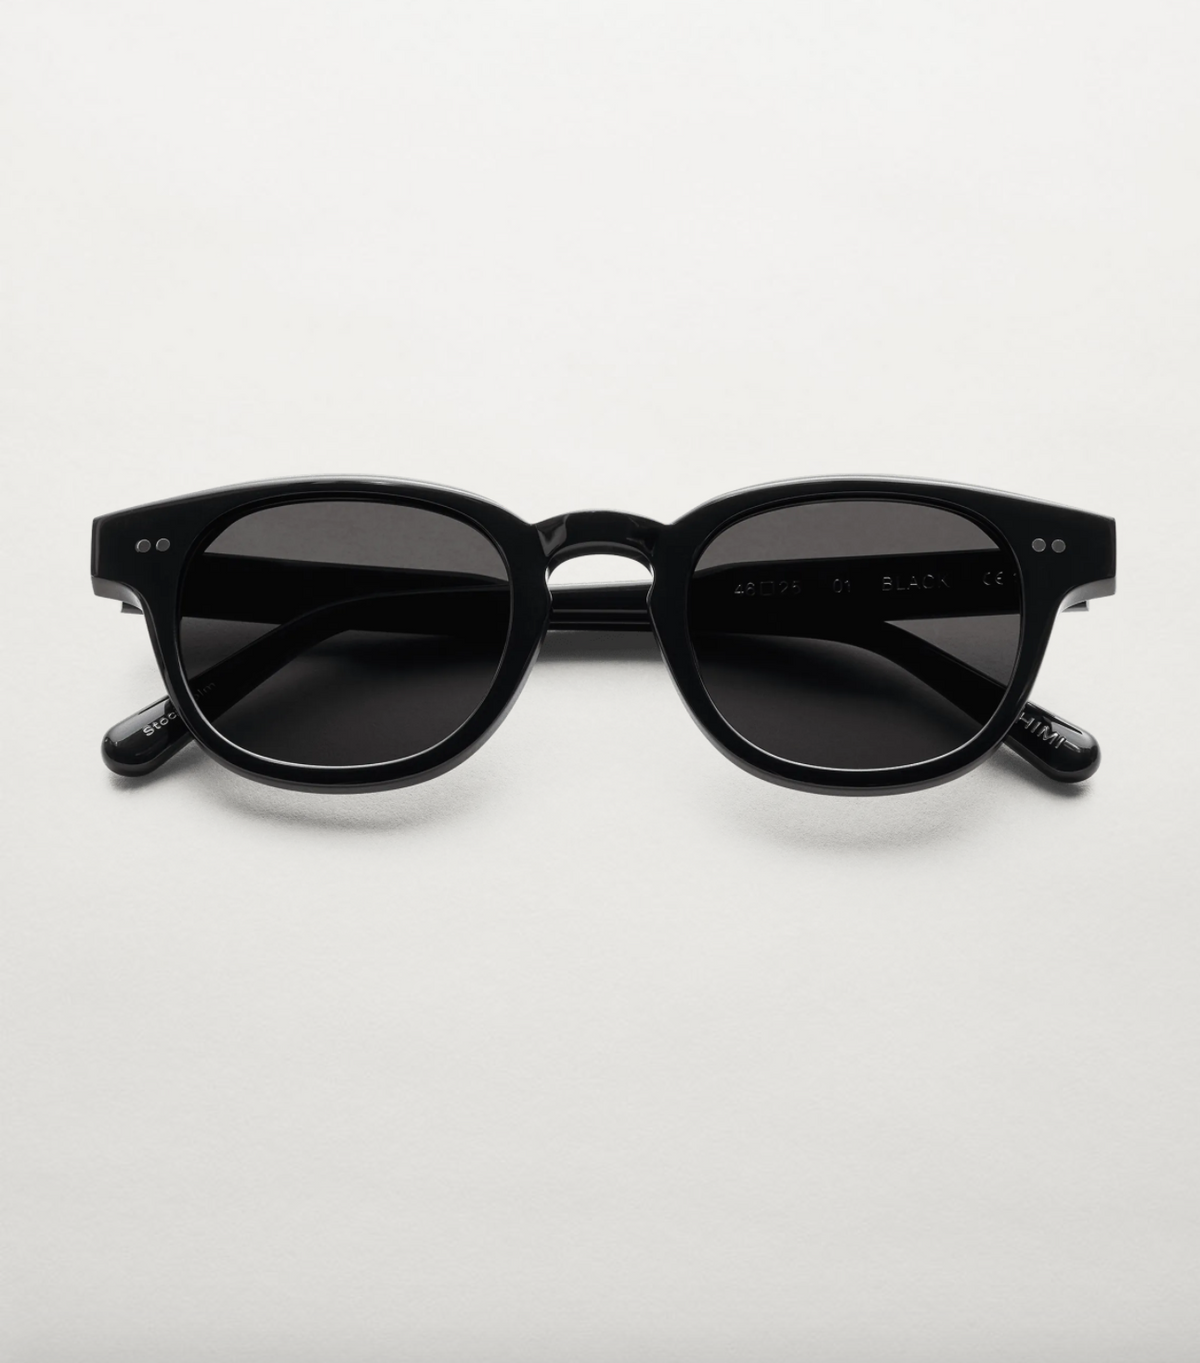 Sunglasses with a black frame and black lenses